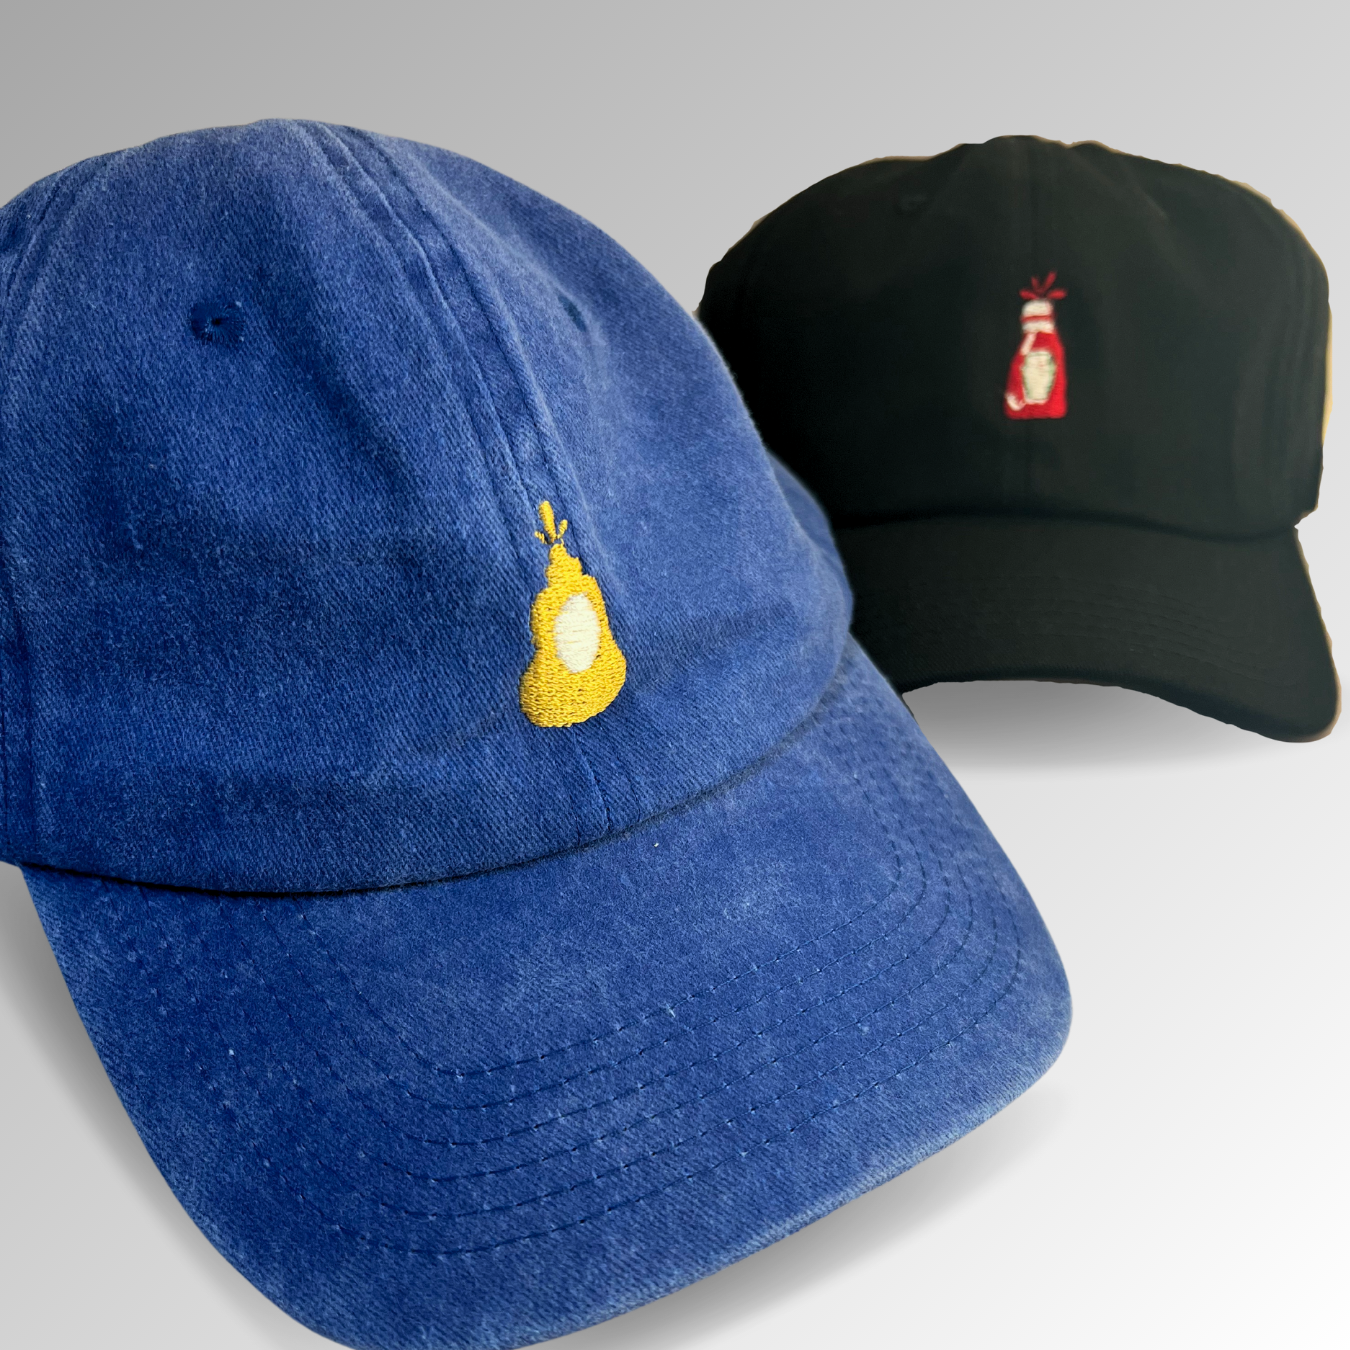 Ketchup Bottle Hat / Funny Embroidered Hats / Dad Hats